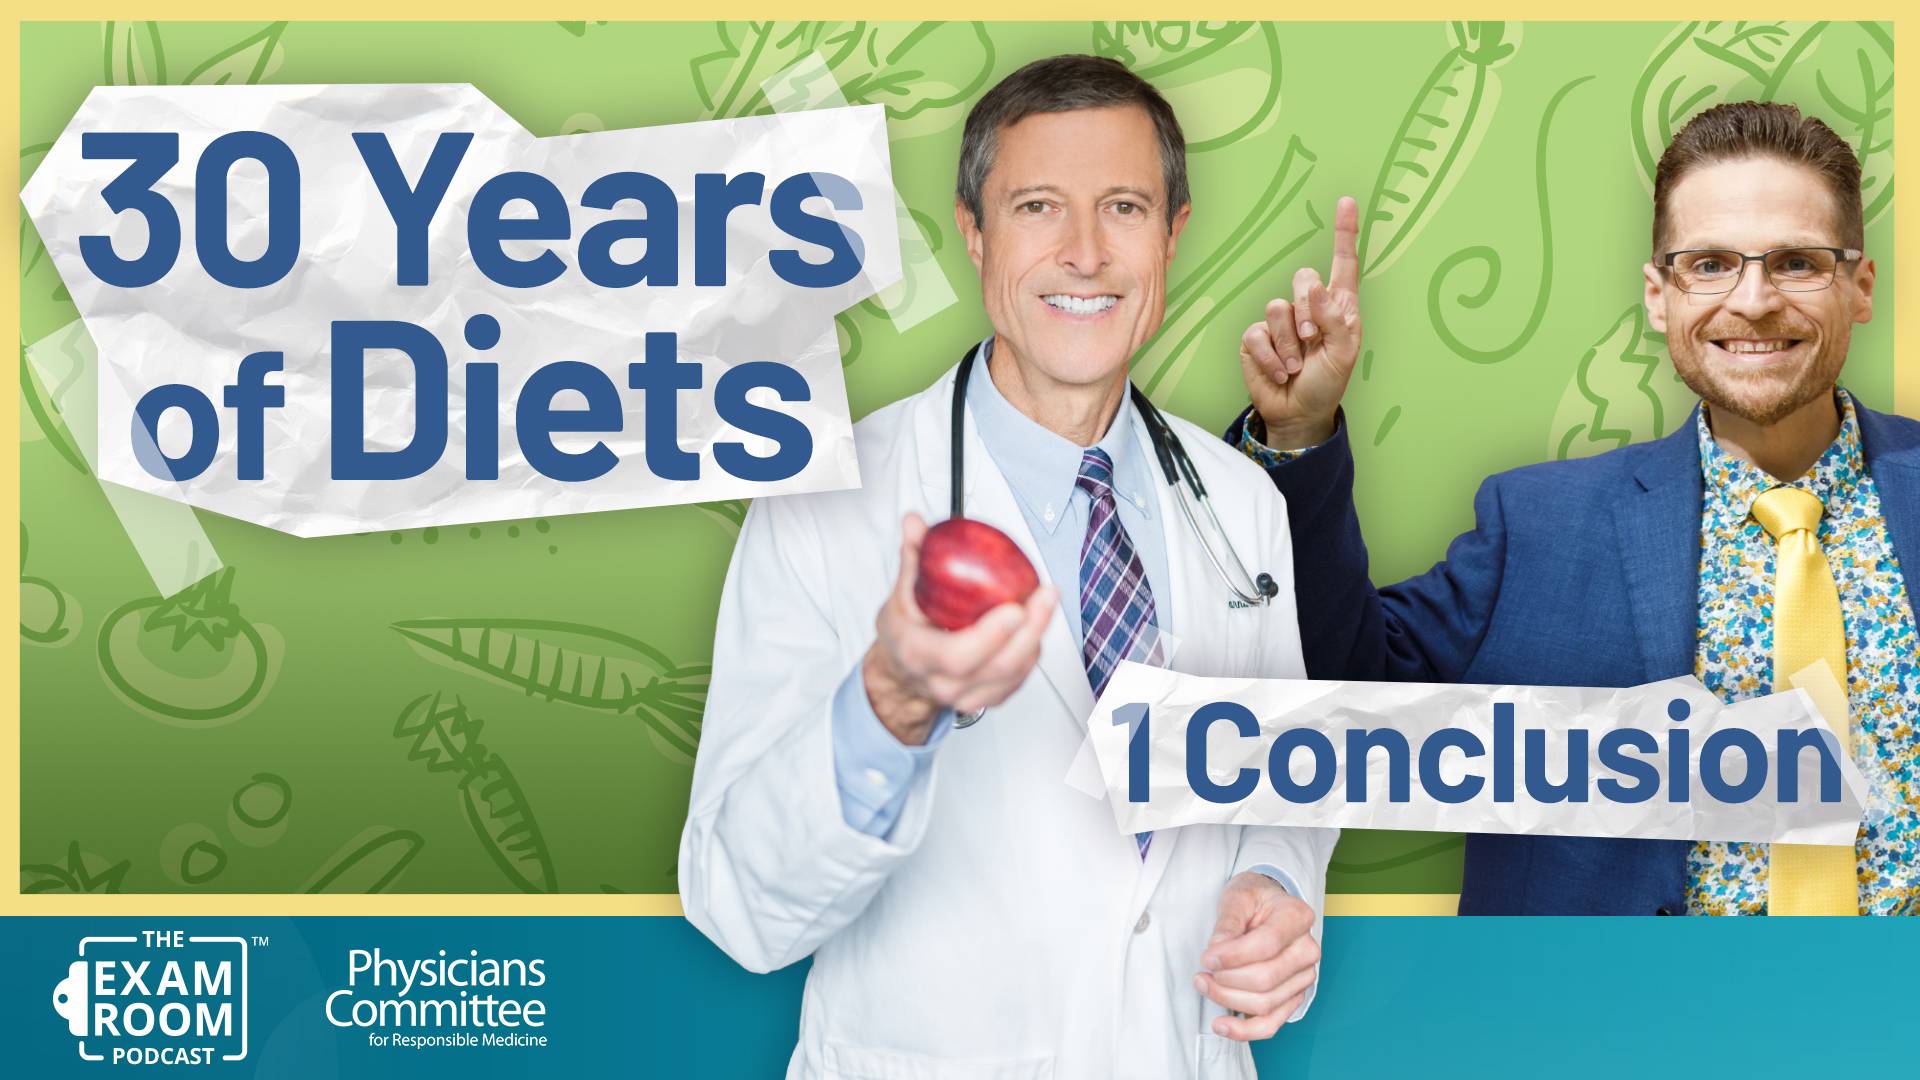 30 Years of Diets: Are We Any Healthier? | Dr. Neal Barnard Live Q&A